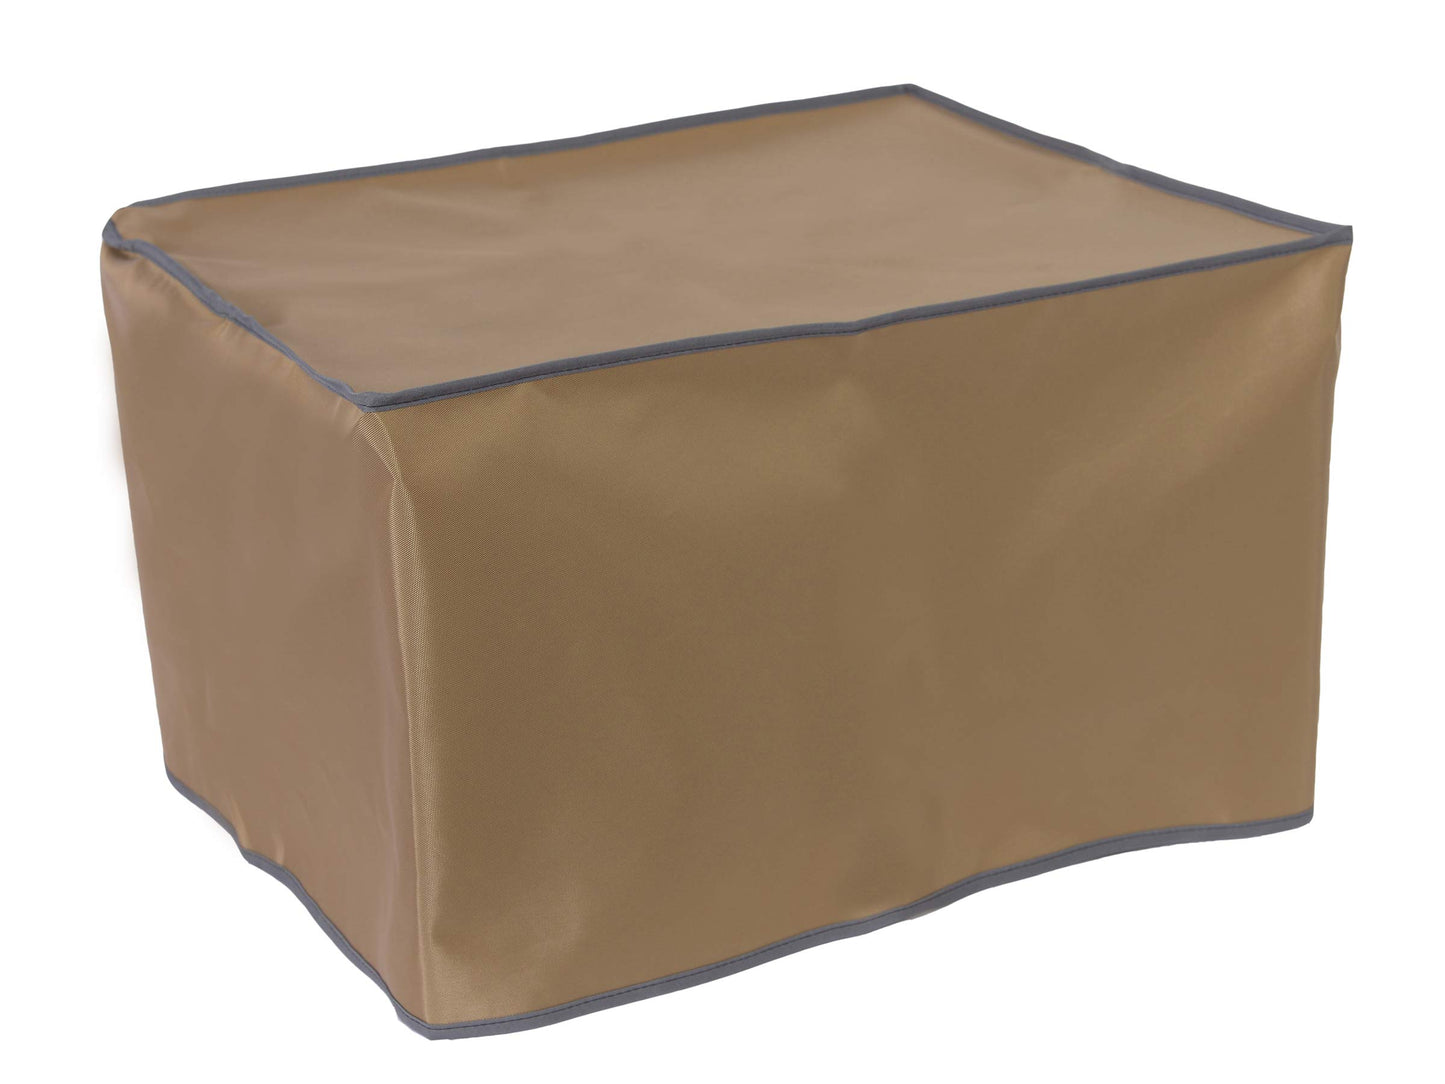 The Perfect Dust Cover, Tan Nylon Cover for Canon Pixma MX492 Wireless All-in-One Printer, Anti Static and Waterproof Cover, Dimensions 17.2''W x 11.7''D x 7.5''H by The Perfect Dust Cover LLC